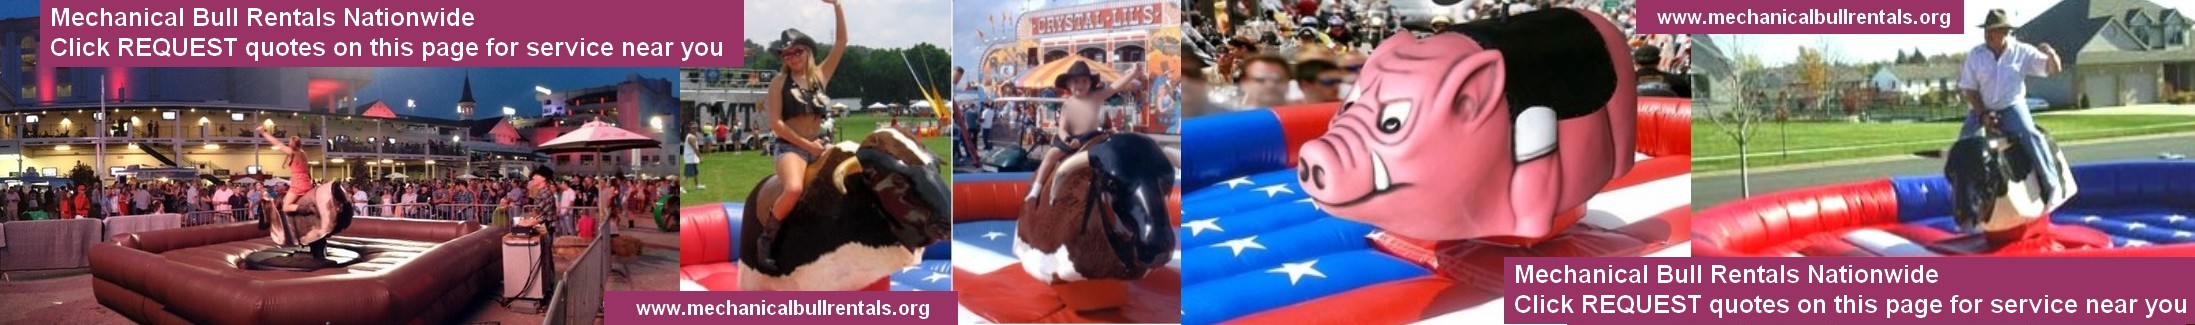 Mechanical Bull Rentals Tallahassee Florida FL and near you. Free referrals to local mechanical bull companies LOGO